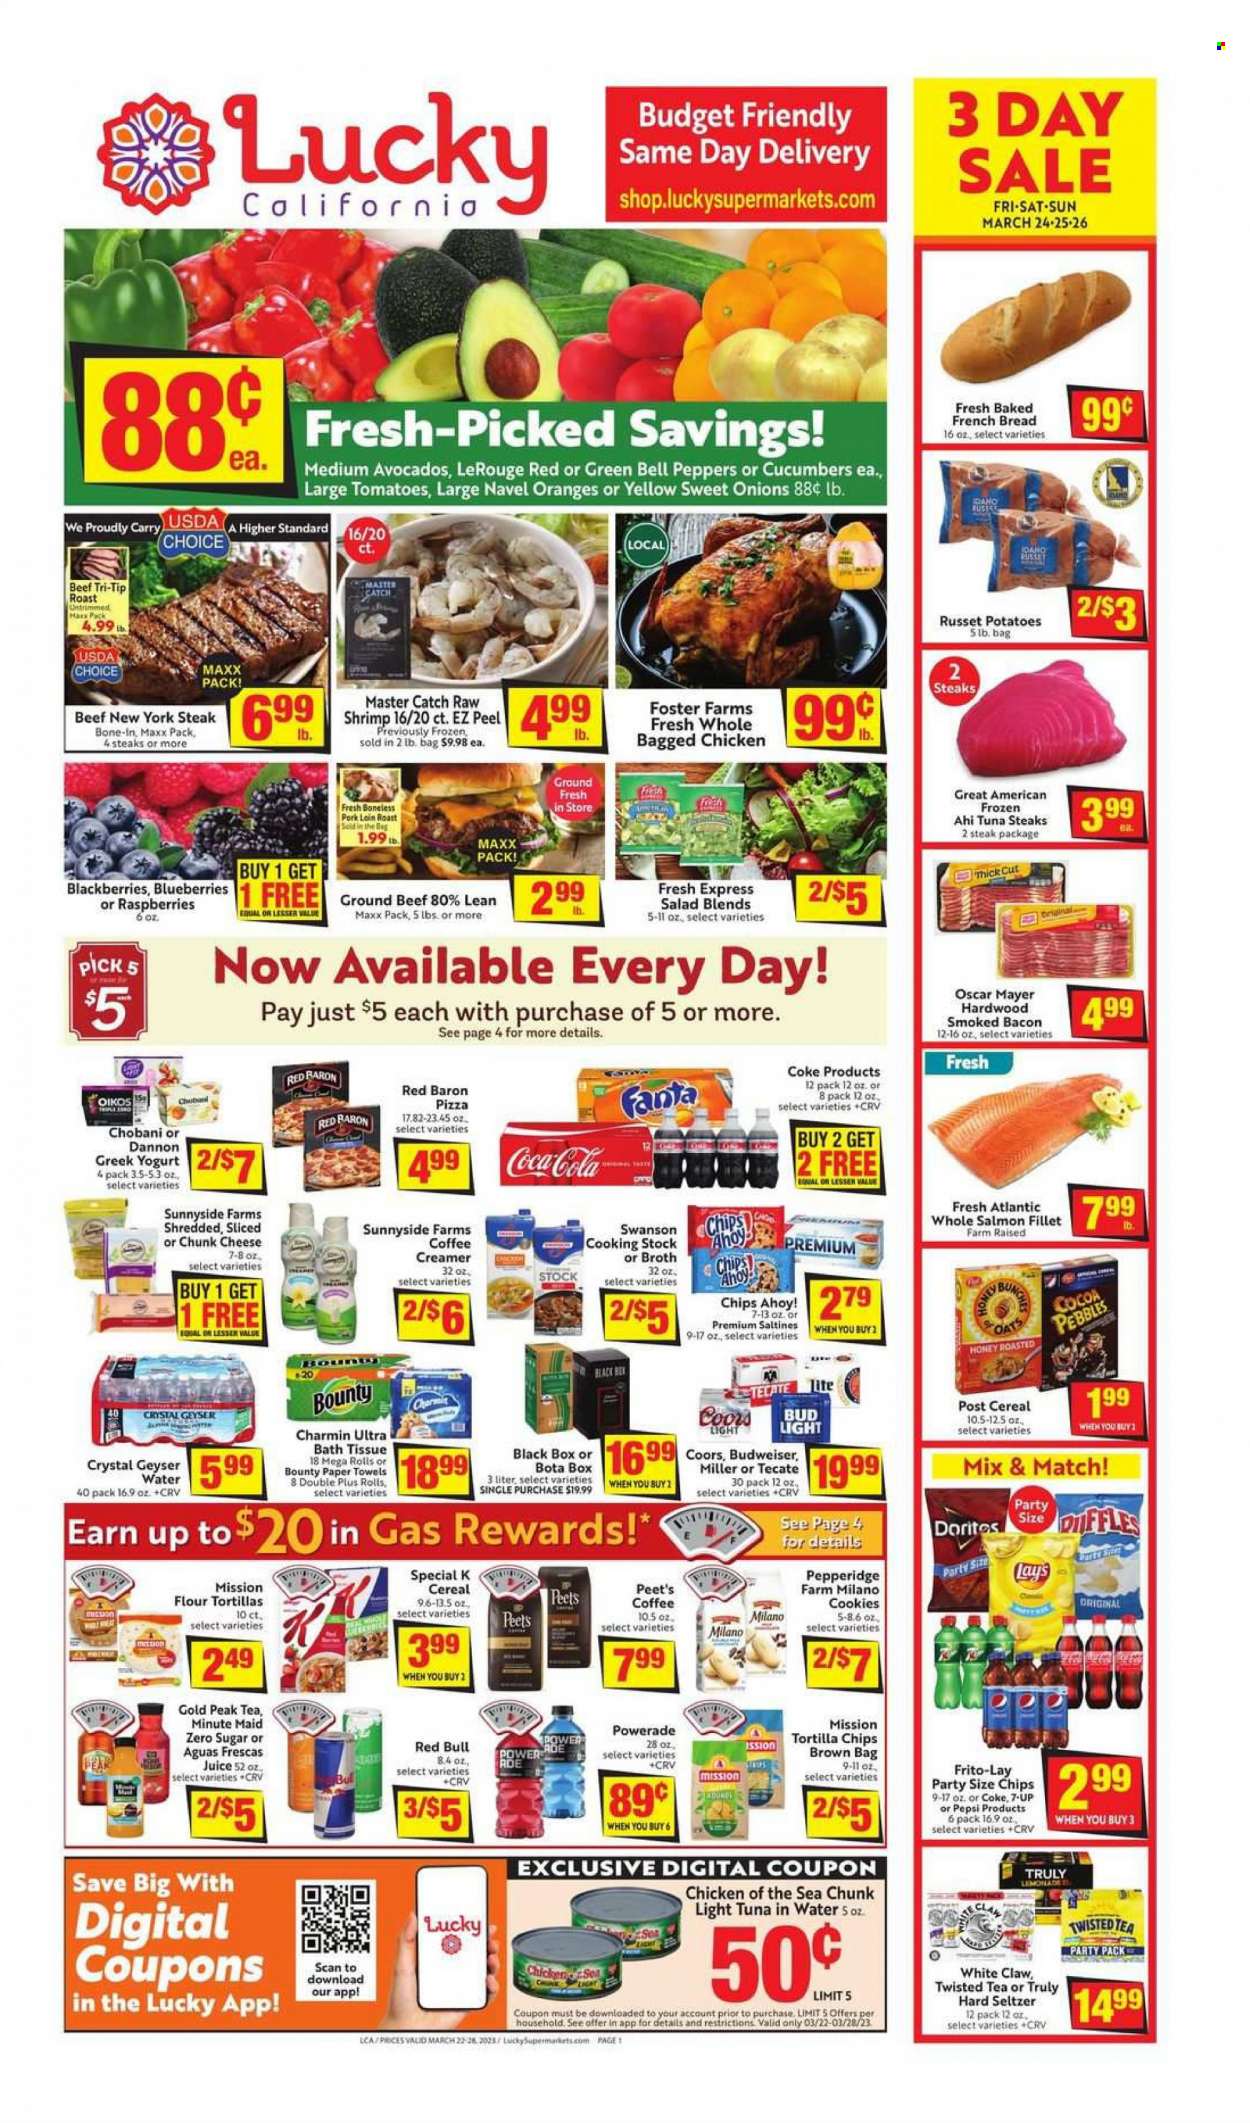 thumbnail - Lucky California Flyer - 03/22/2023 - 03/28/2023 - Sales products - bread, flour tortillas, french bread, bell peppers, cucumber, russet potatoes, potatoes, salad, peppers, avocado, blackberries, blueberries, pears, oranges, salmon, salmon fillet, tuna, pizza, roast, bacon, Oscar Mayer, chunk cheese, greek yoghurt, yoghurt, Chobani, Dannon, creamer, Red Baron, cookies, Bounty, Chips Ahoy!, Doritos, tortilla chips, Lay’s, Frito-Lay, saltines, broth, tuna in water, light tuna, Chicken of the Sea, cereals, honey, Coca-Cola, lemonade, Powerade, Pepsi, juice, Fanta, 7UP, Red Bull, Gold Peak Tea, fruit punch, Coke, water, tea, White Claw, Hard Seltzer, TRULY, beer, Bud Light, Miller, beef meat, ground beef, steak, pork loin, pork meat, Budweiser, Coors, Twisted Tea, navel oranges. Page 1.